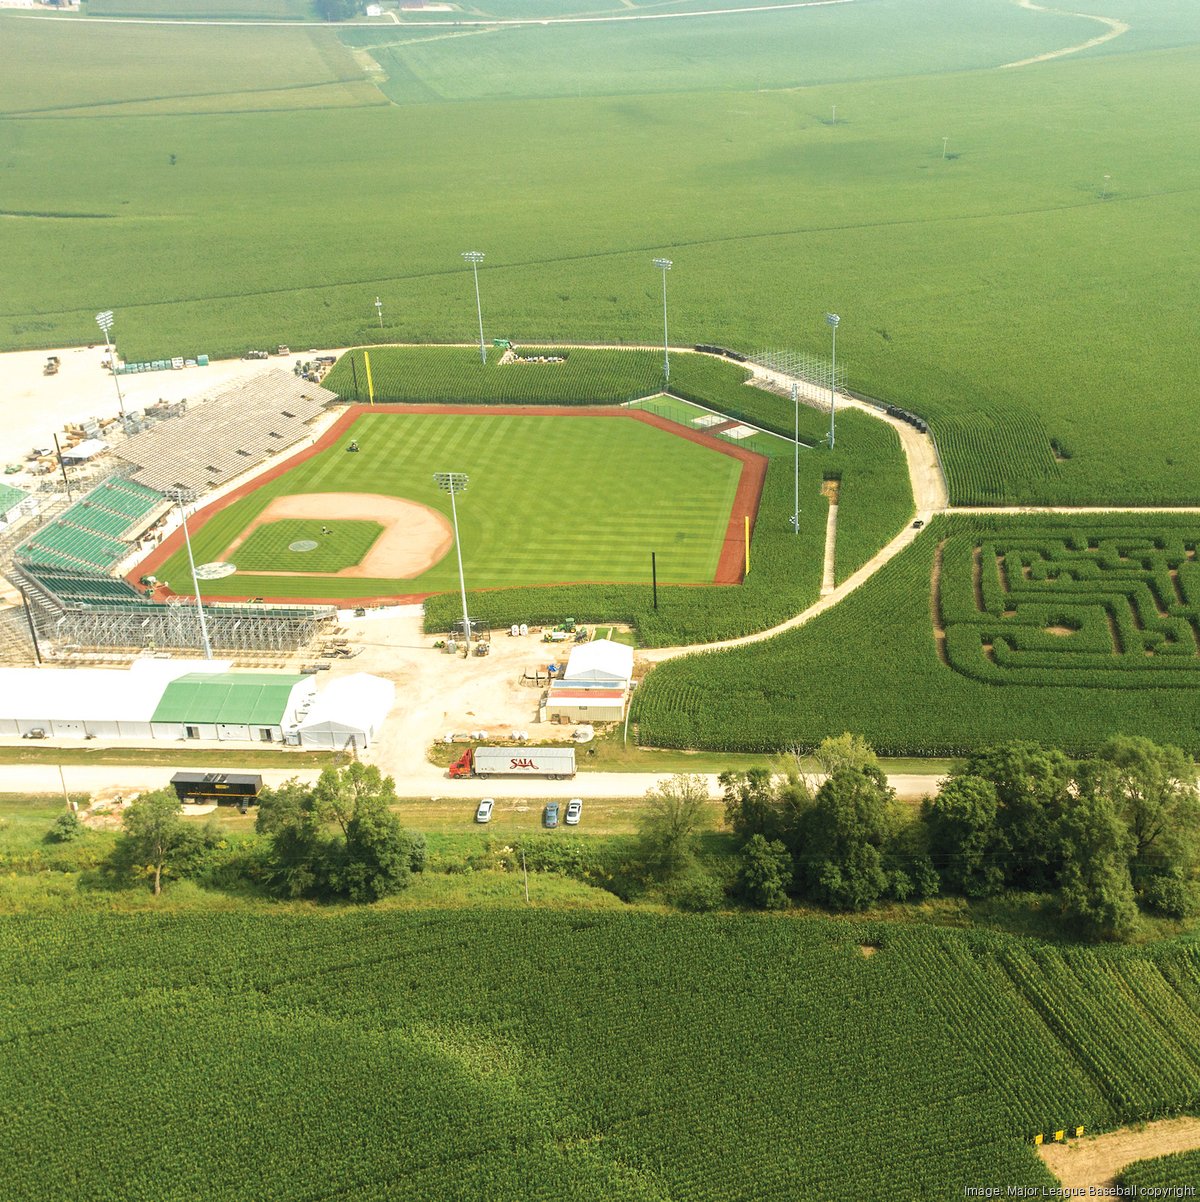 New York Yankees, Chicago White Sox headed to 'Field of Dreams